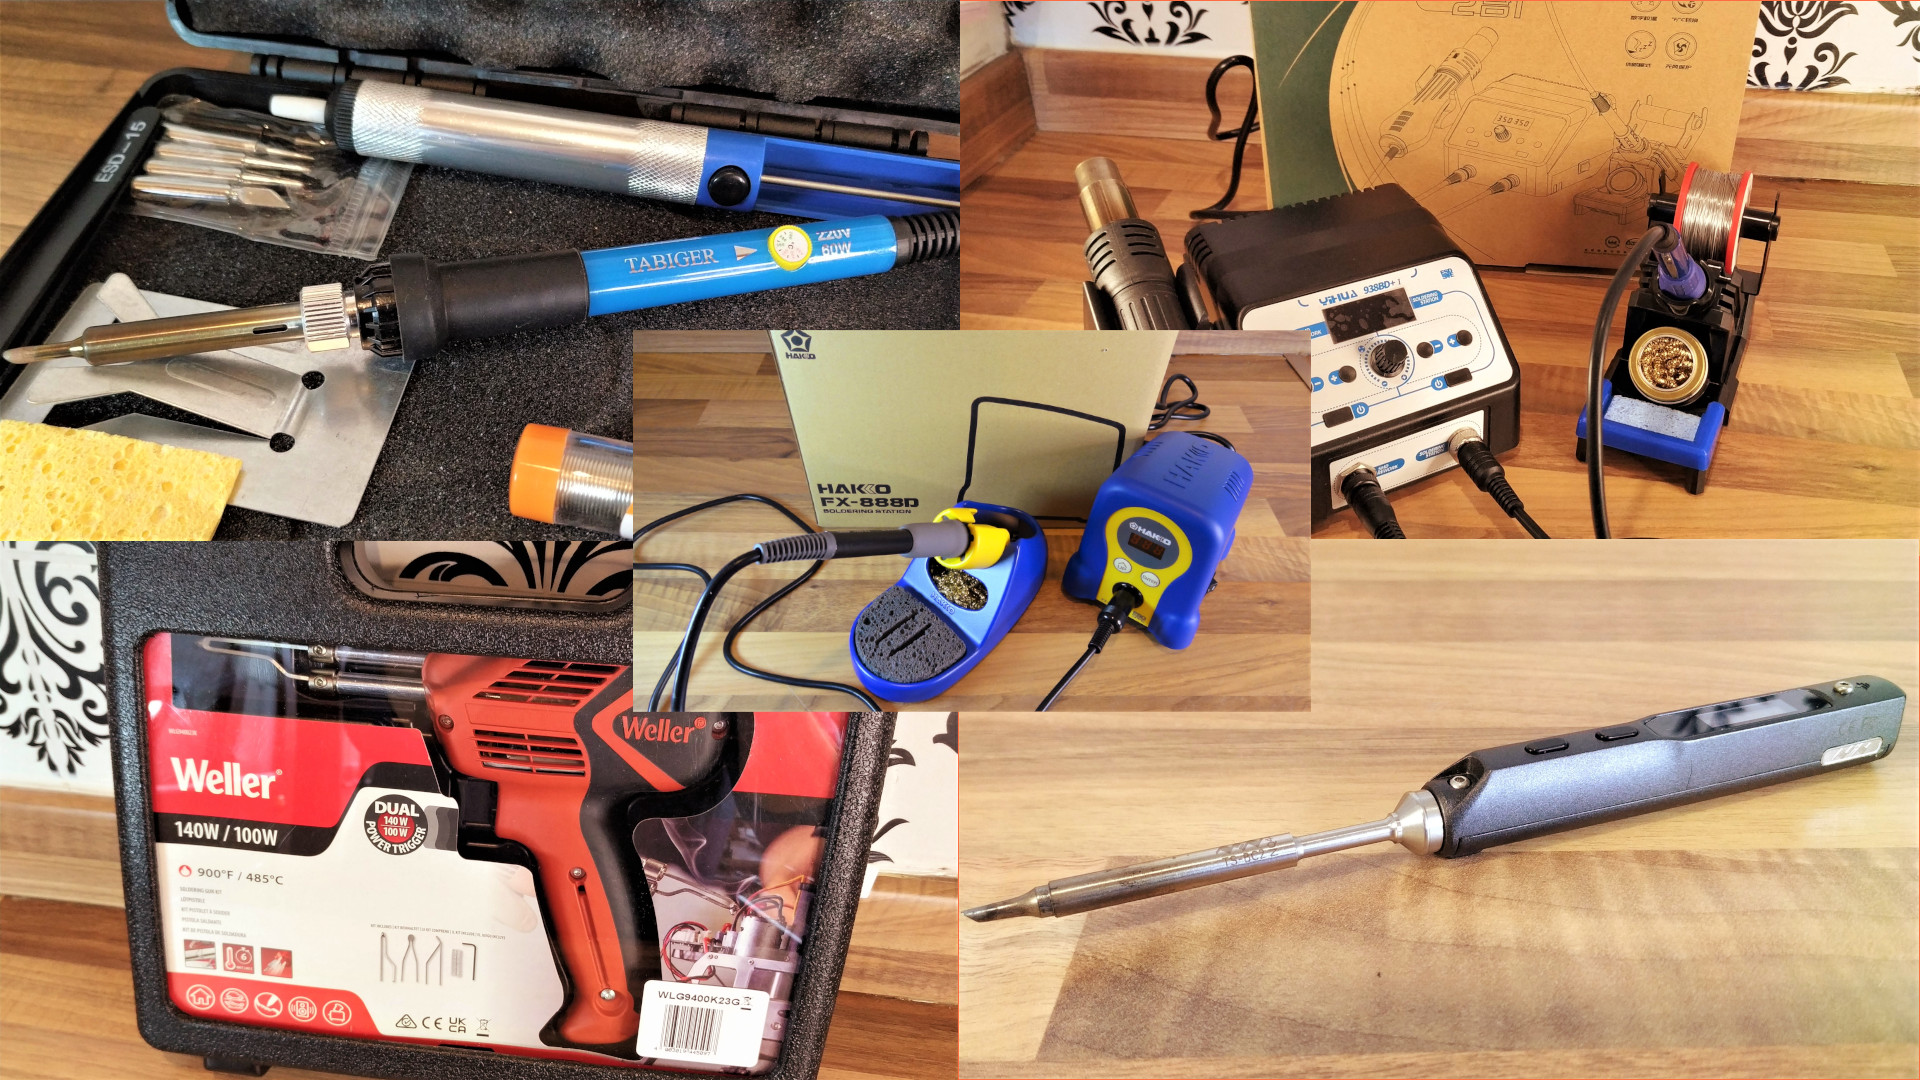 Whats in my Kit: RC Tool Kit 